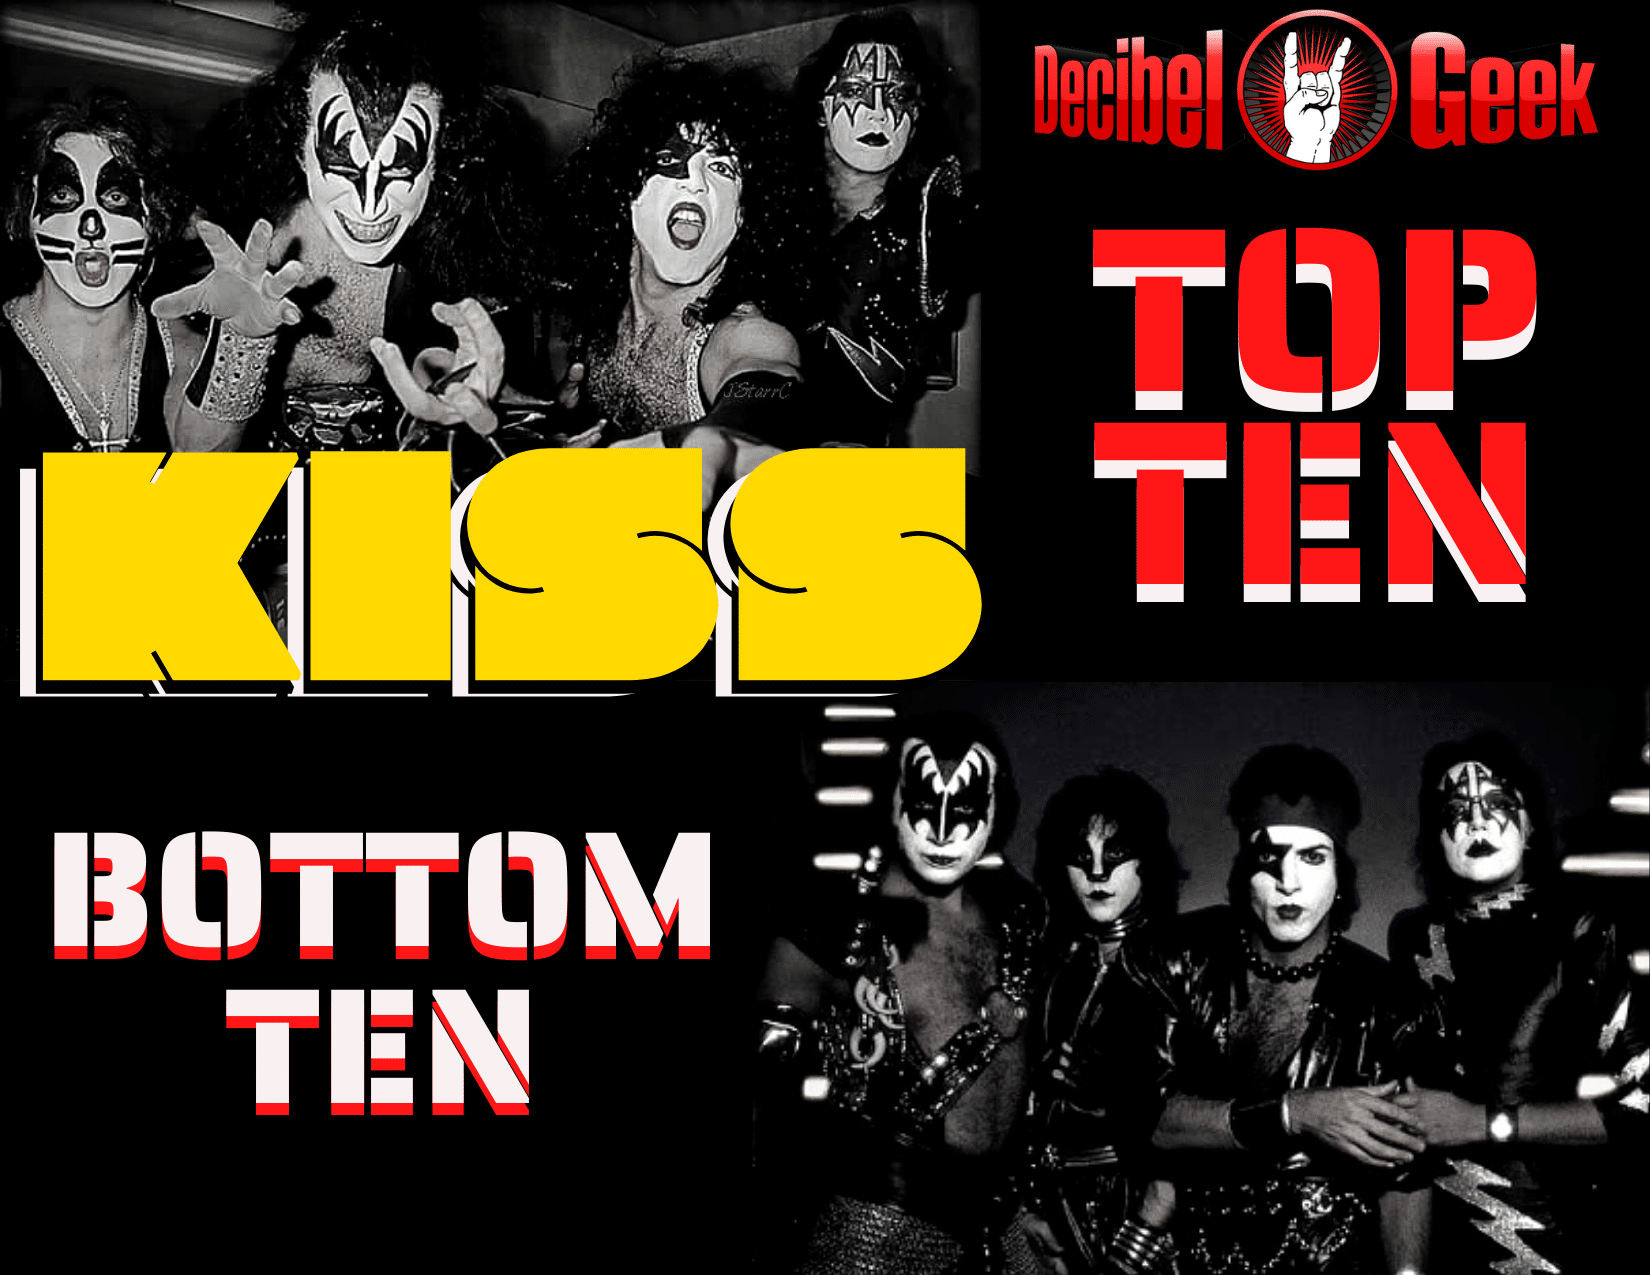 KISS, gene simmons, paul stanley, ace frehley, peter criss